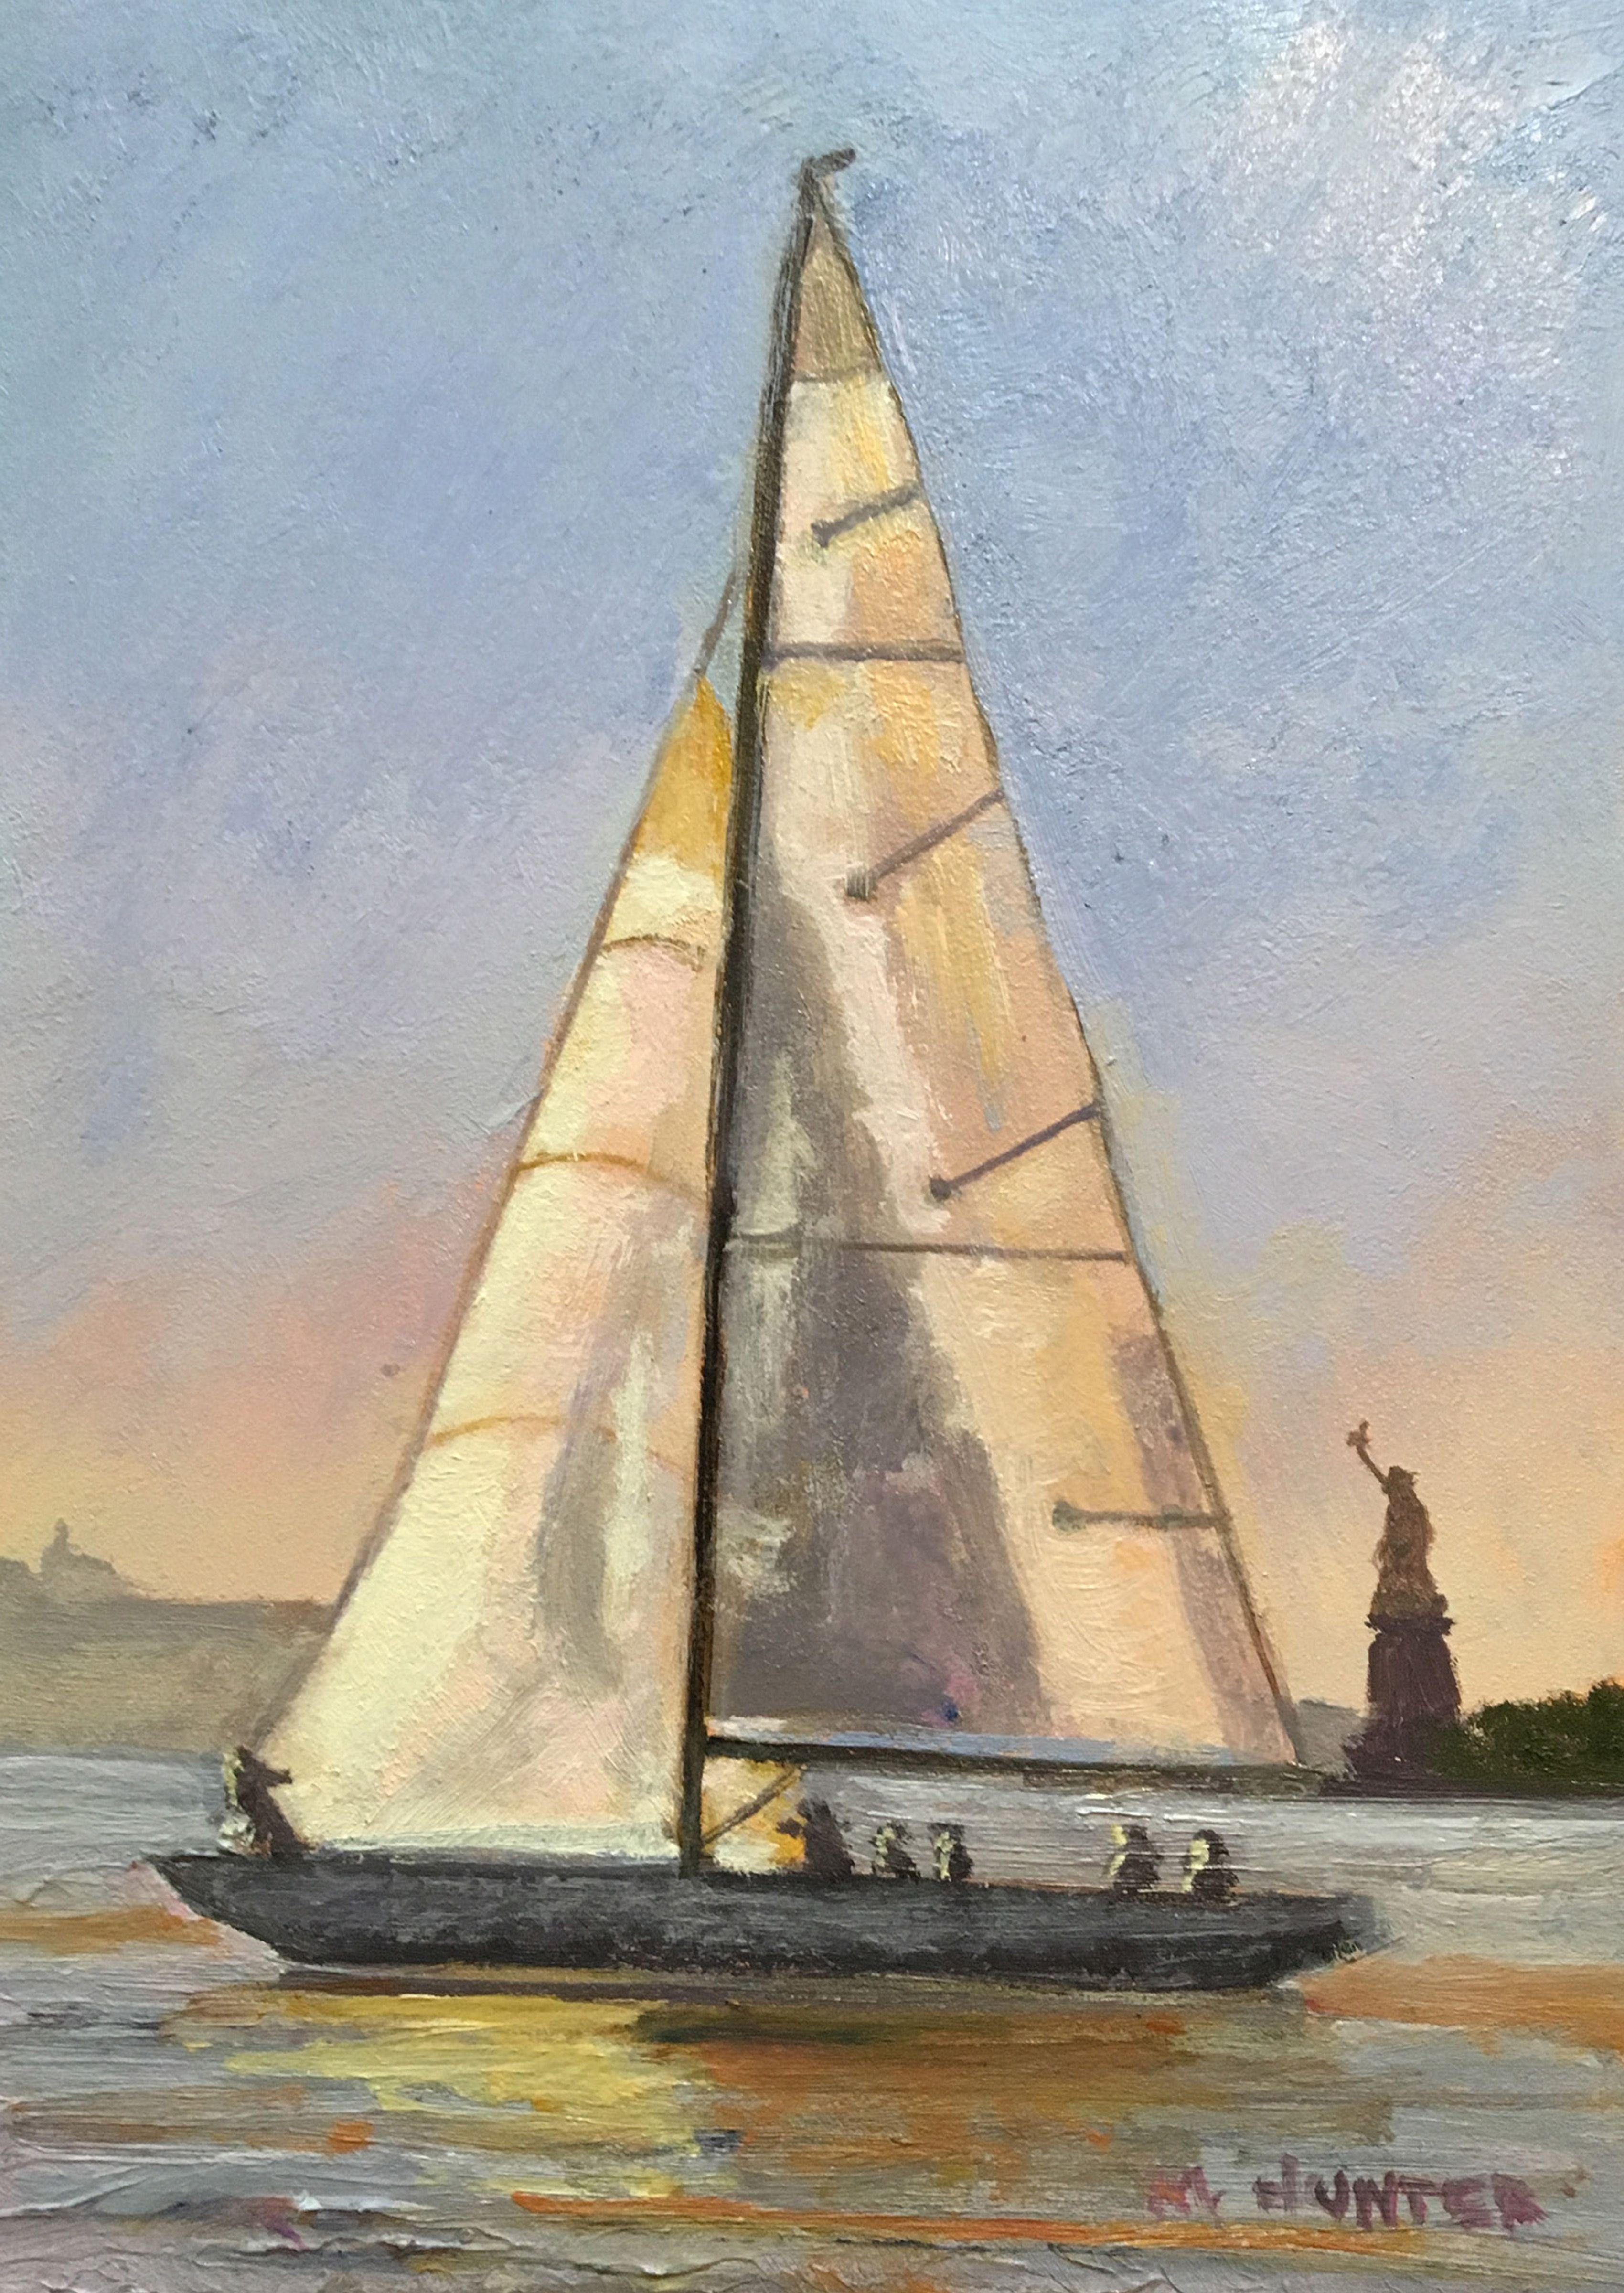 The late afternoon sun lights up the sails of an America's Cup Twelve Meter as it glides past the Statue of Liberty in New York Harbor. :: Painting :: Realism :: This piece comes with an official certificate of authenticity signed by the artist ::